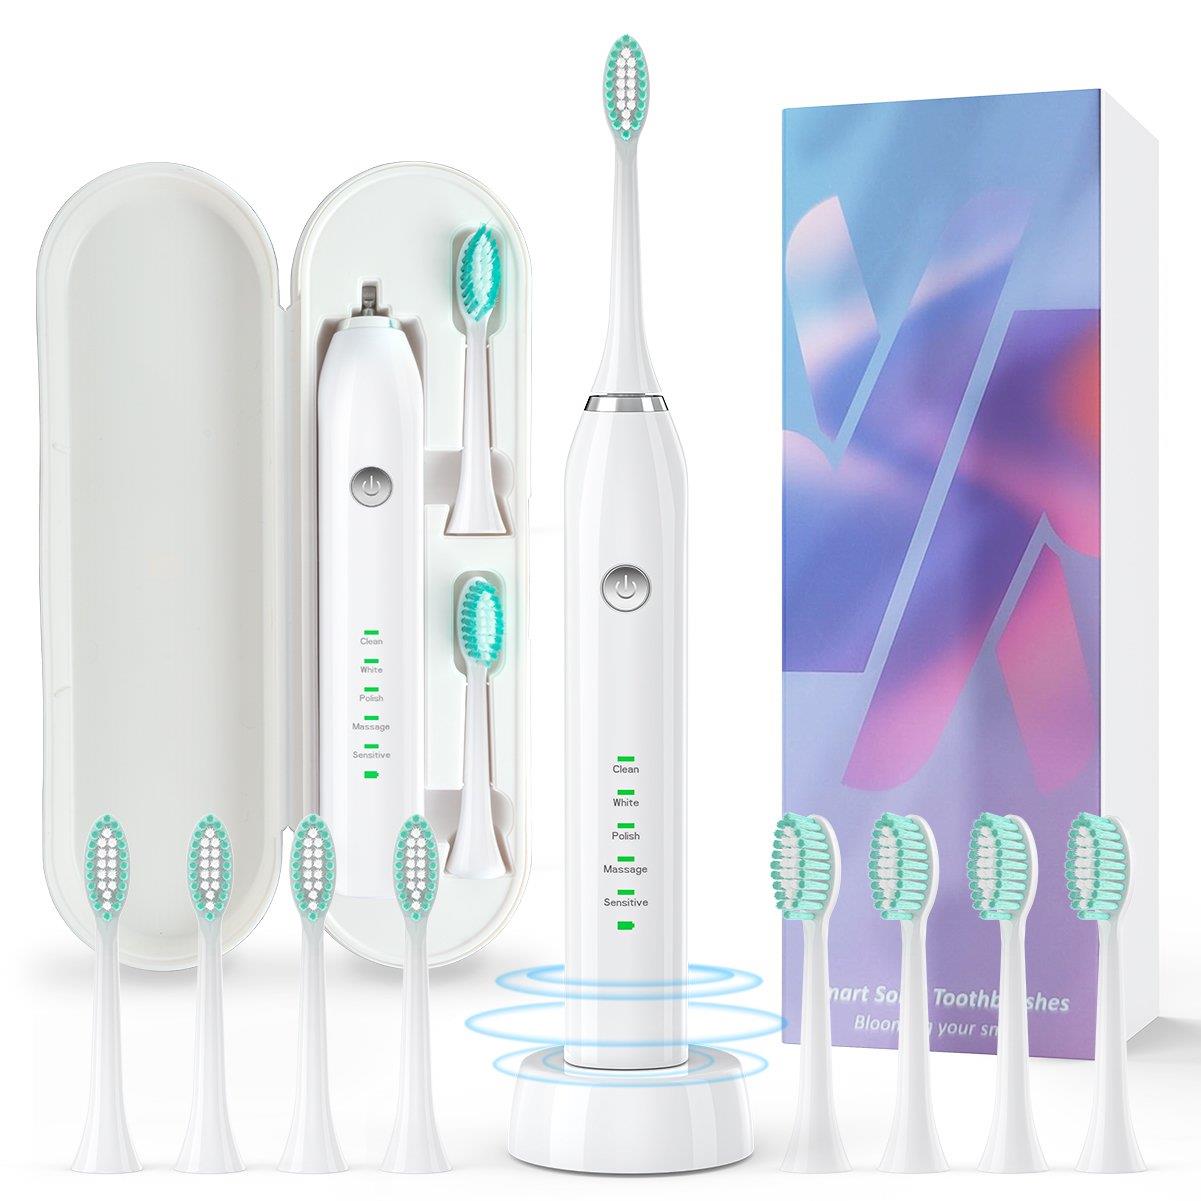 Sonic Electric Toothbrush,5 Modes with Smart Timer, 8 Brush Heads & Premium Travel Case